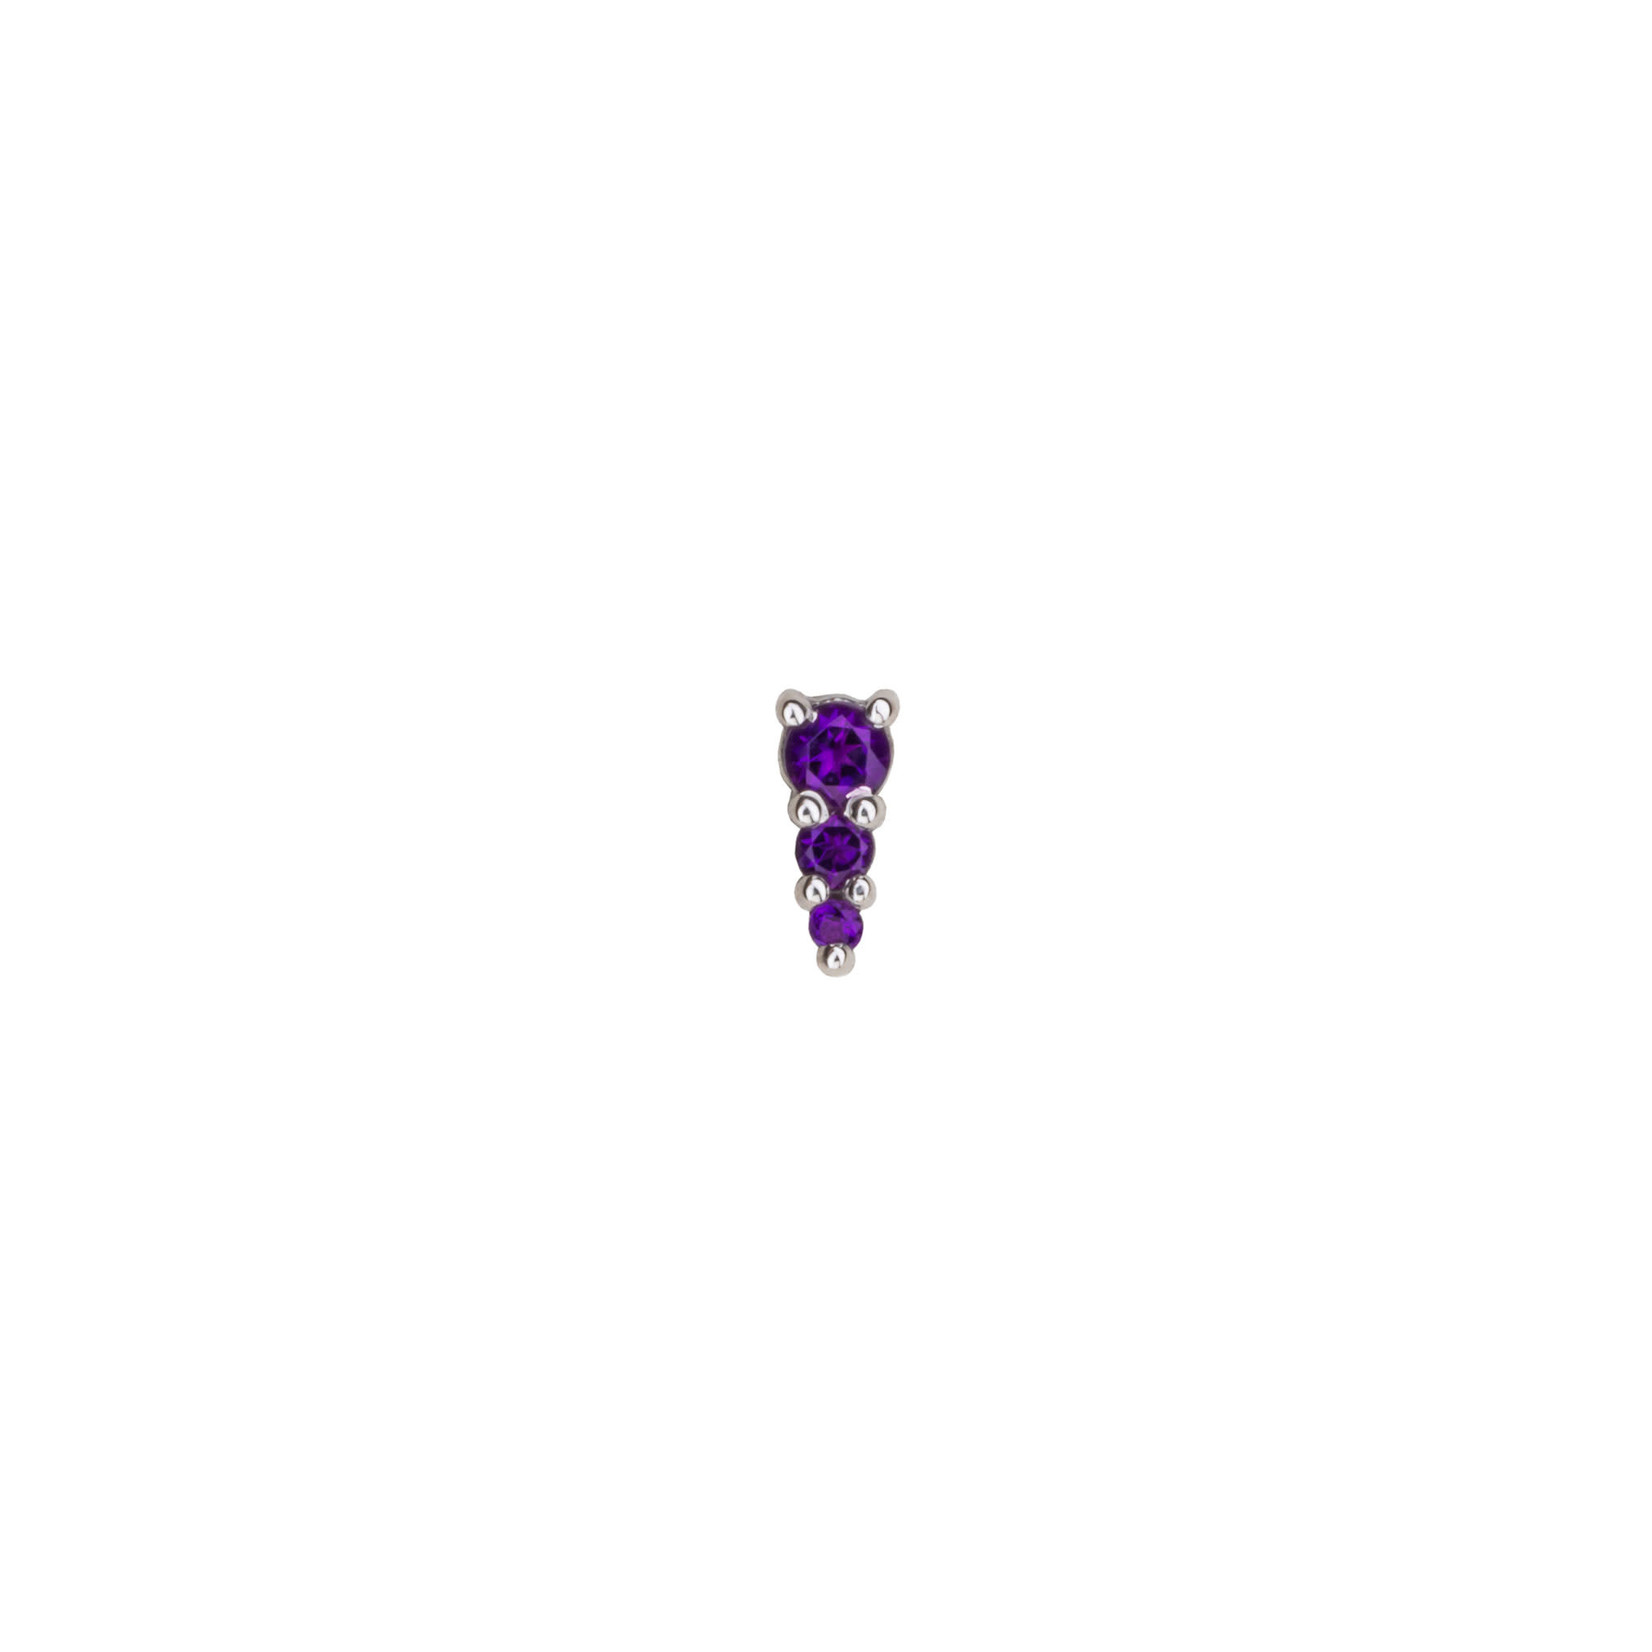 BVLA BVLA "Jeanie 3" press fit end with 2.0, 1.5, and 1.0 AA amethyst